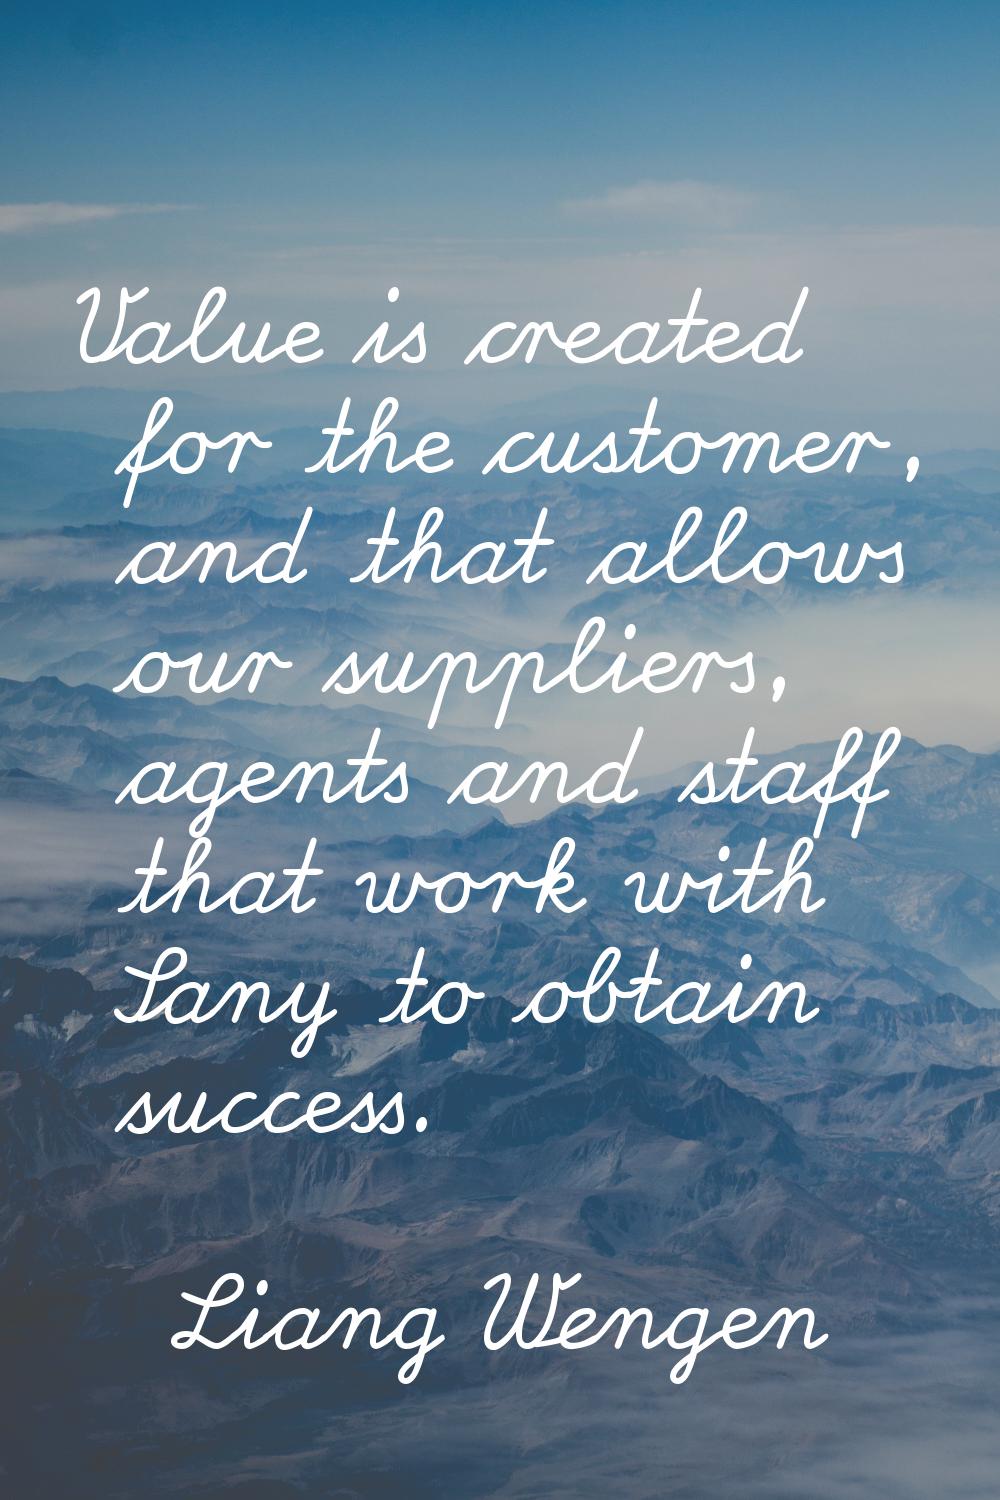 Value is created for the customer, and that allows our suppliers, agents and staff that work with S